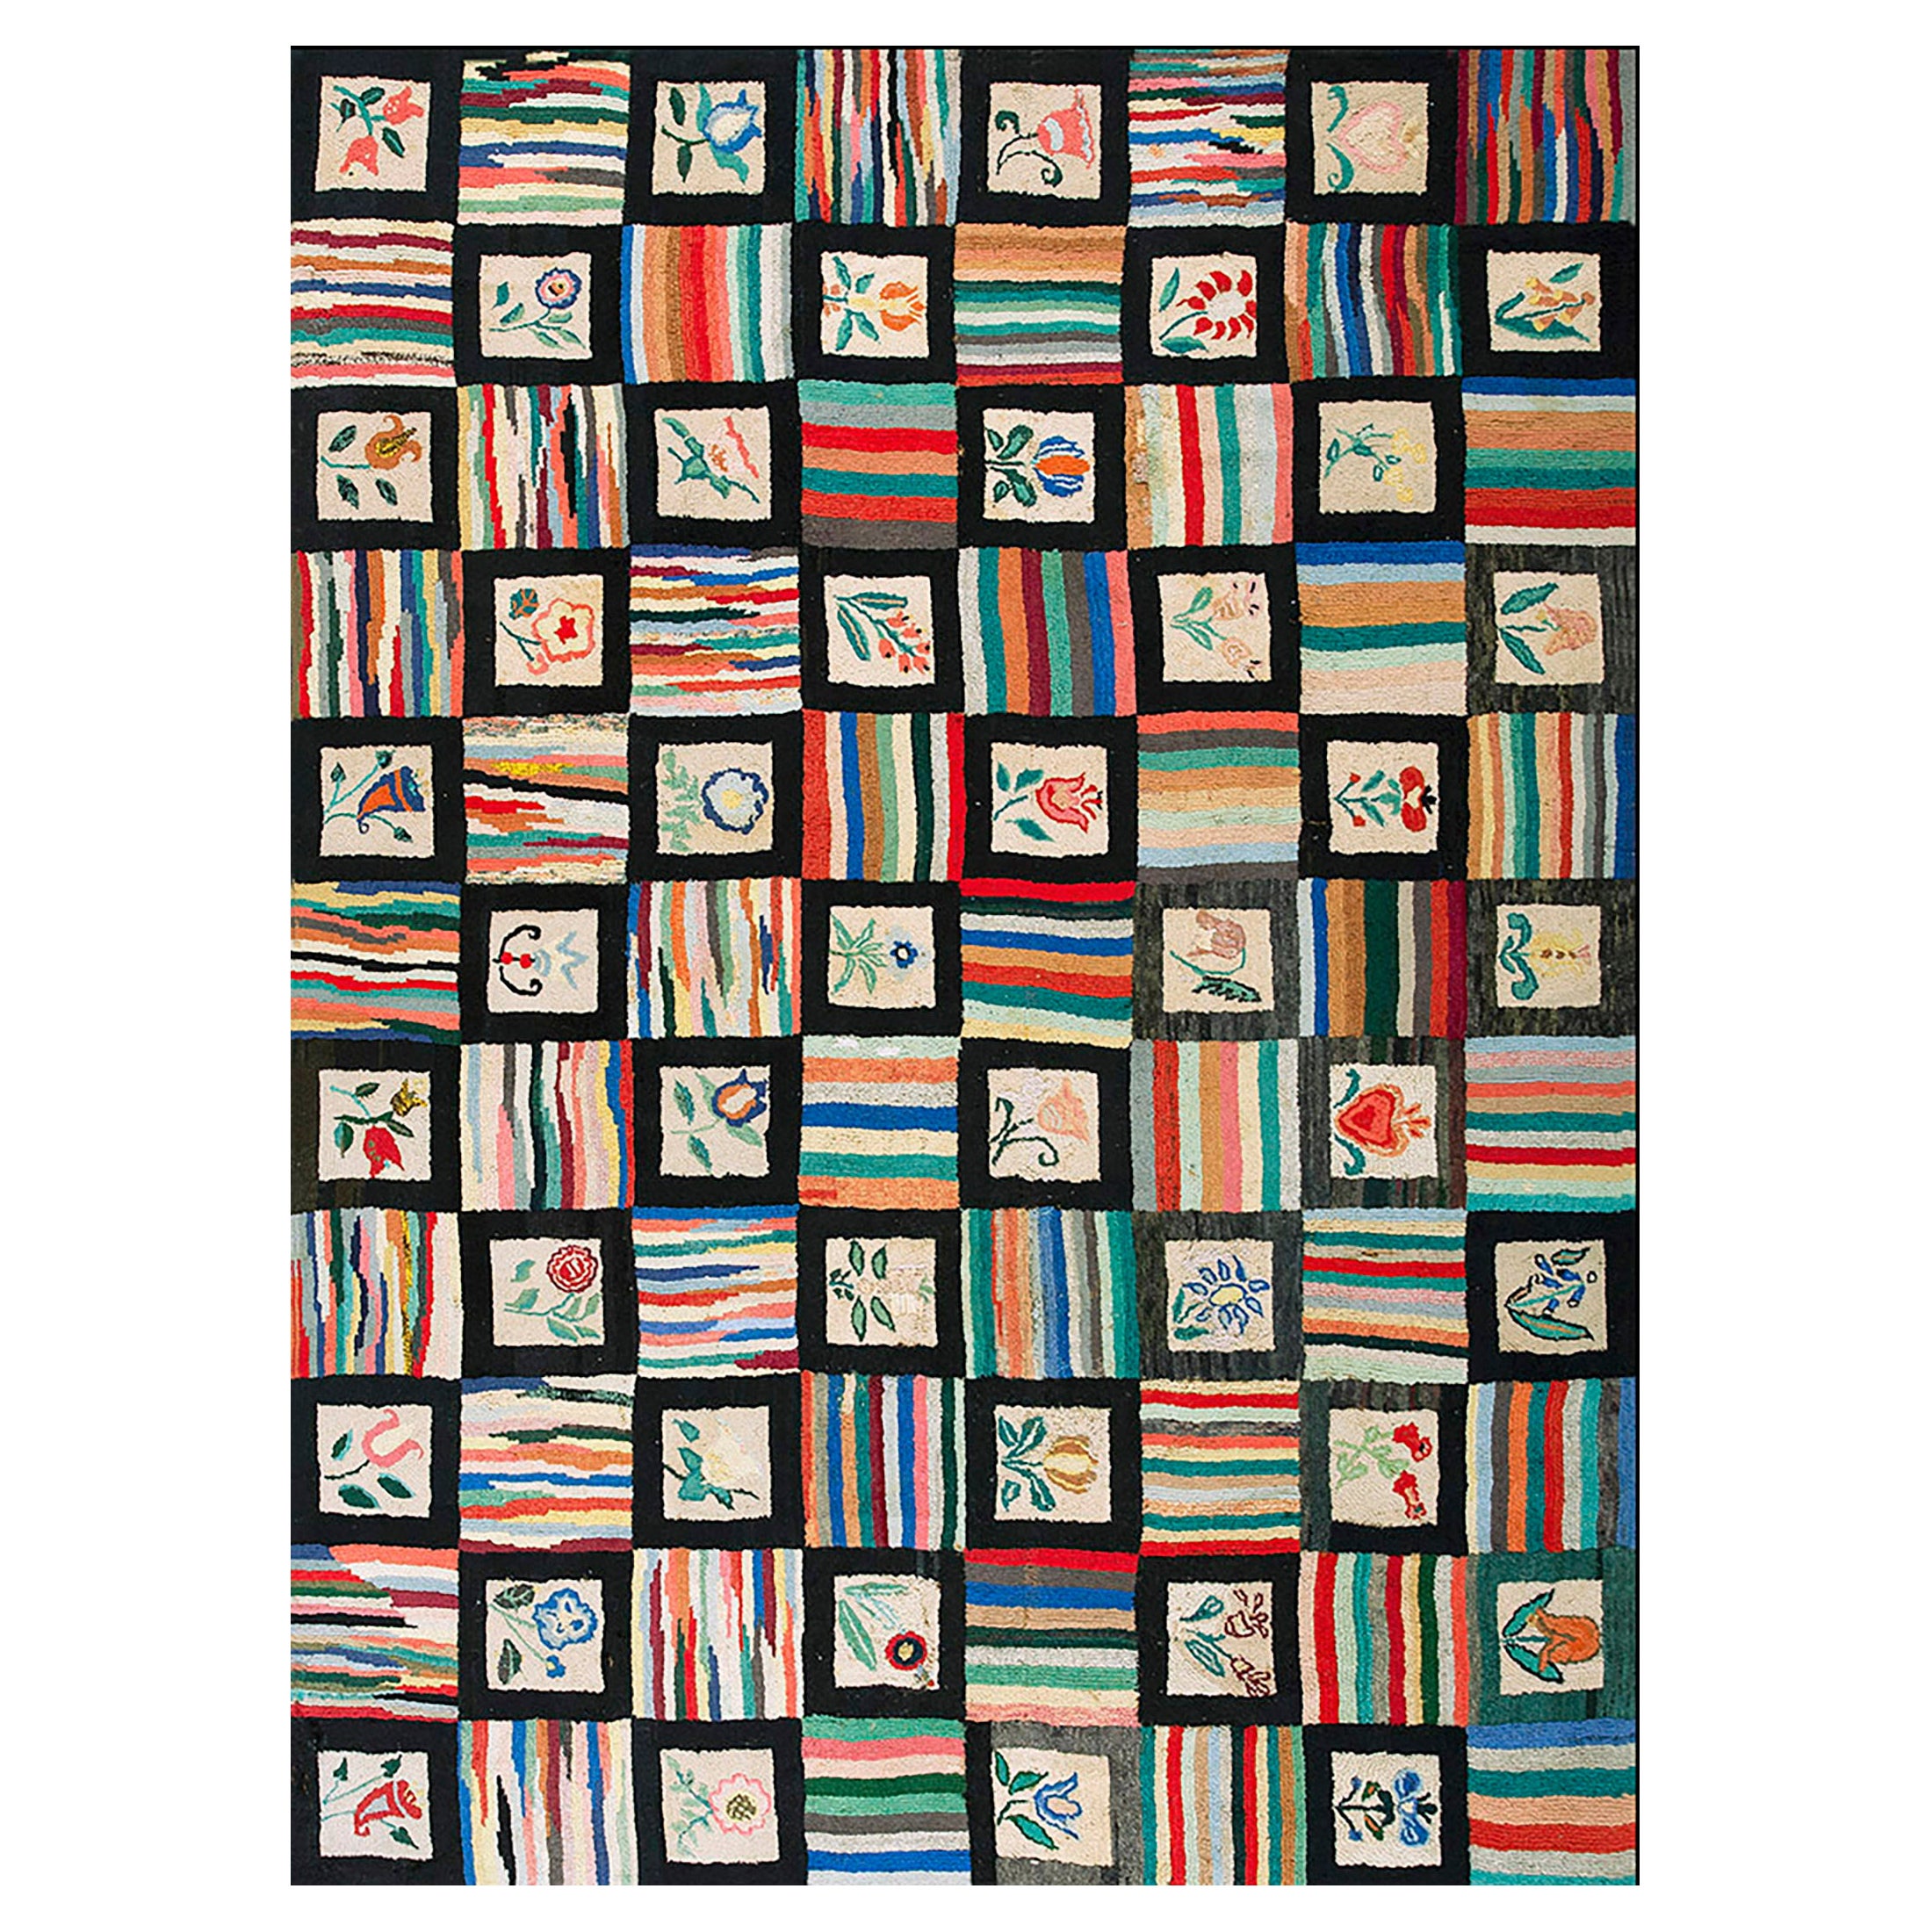 1930s American Hooked Rug ( 7'4" x 10'3 - 224 x 312 )